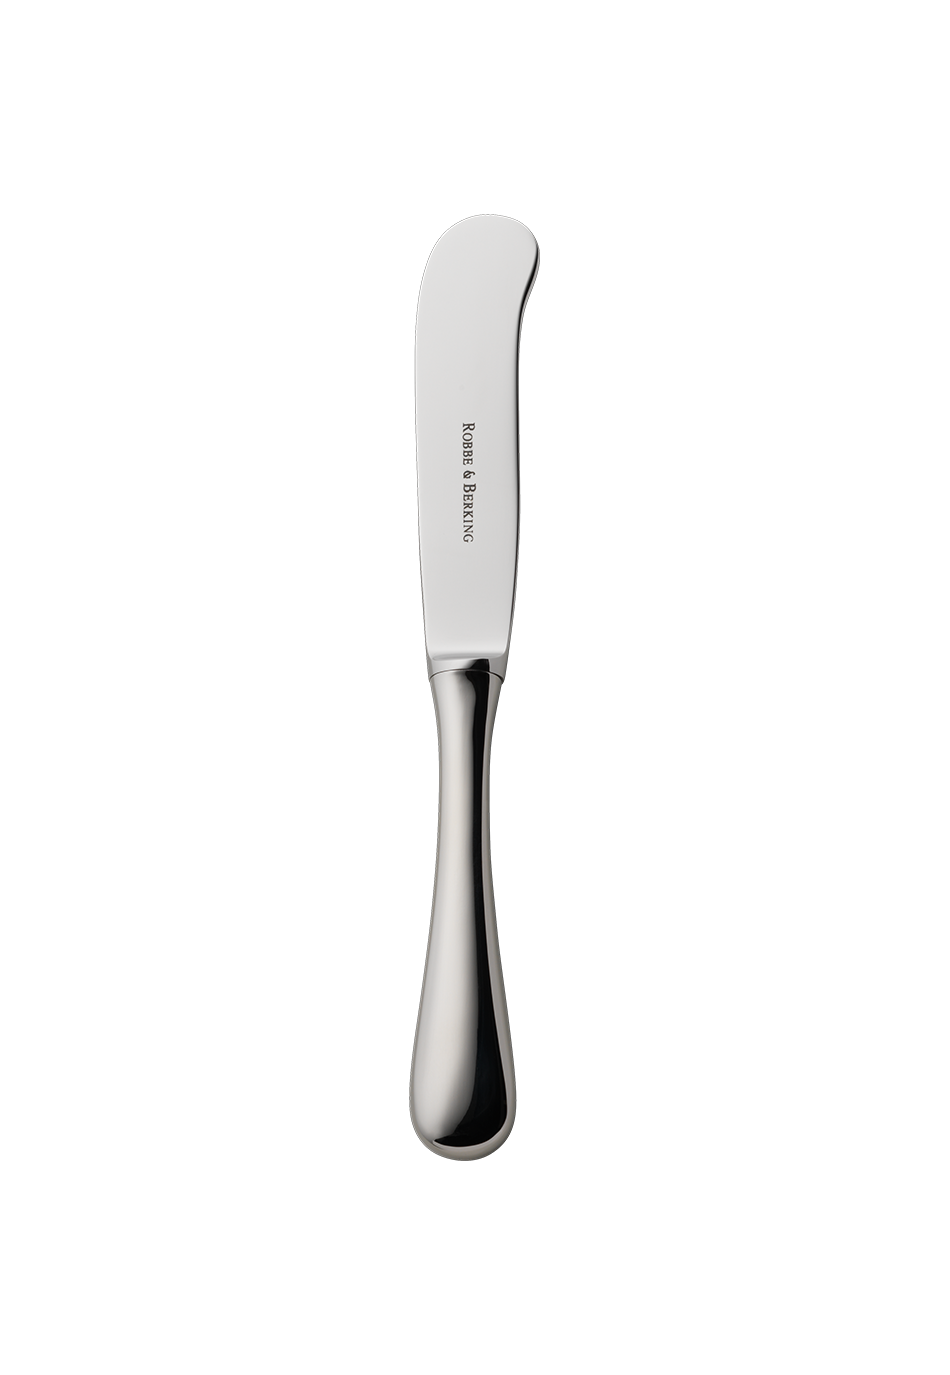 Como Butter Knife (18/8 stainless steel)